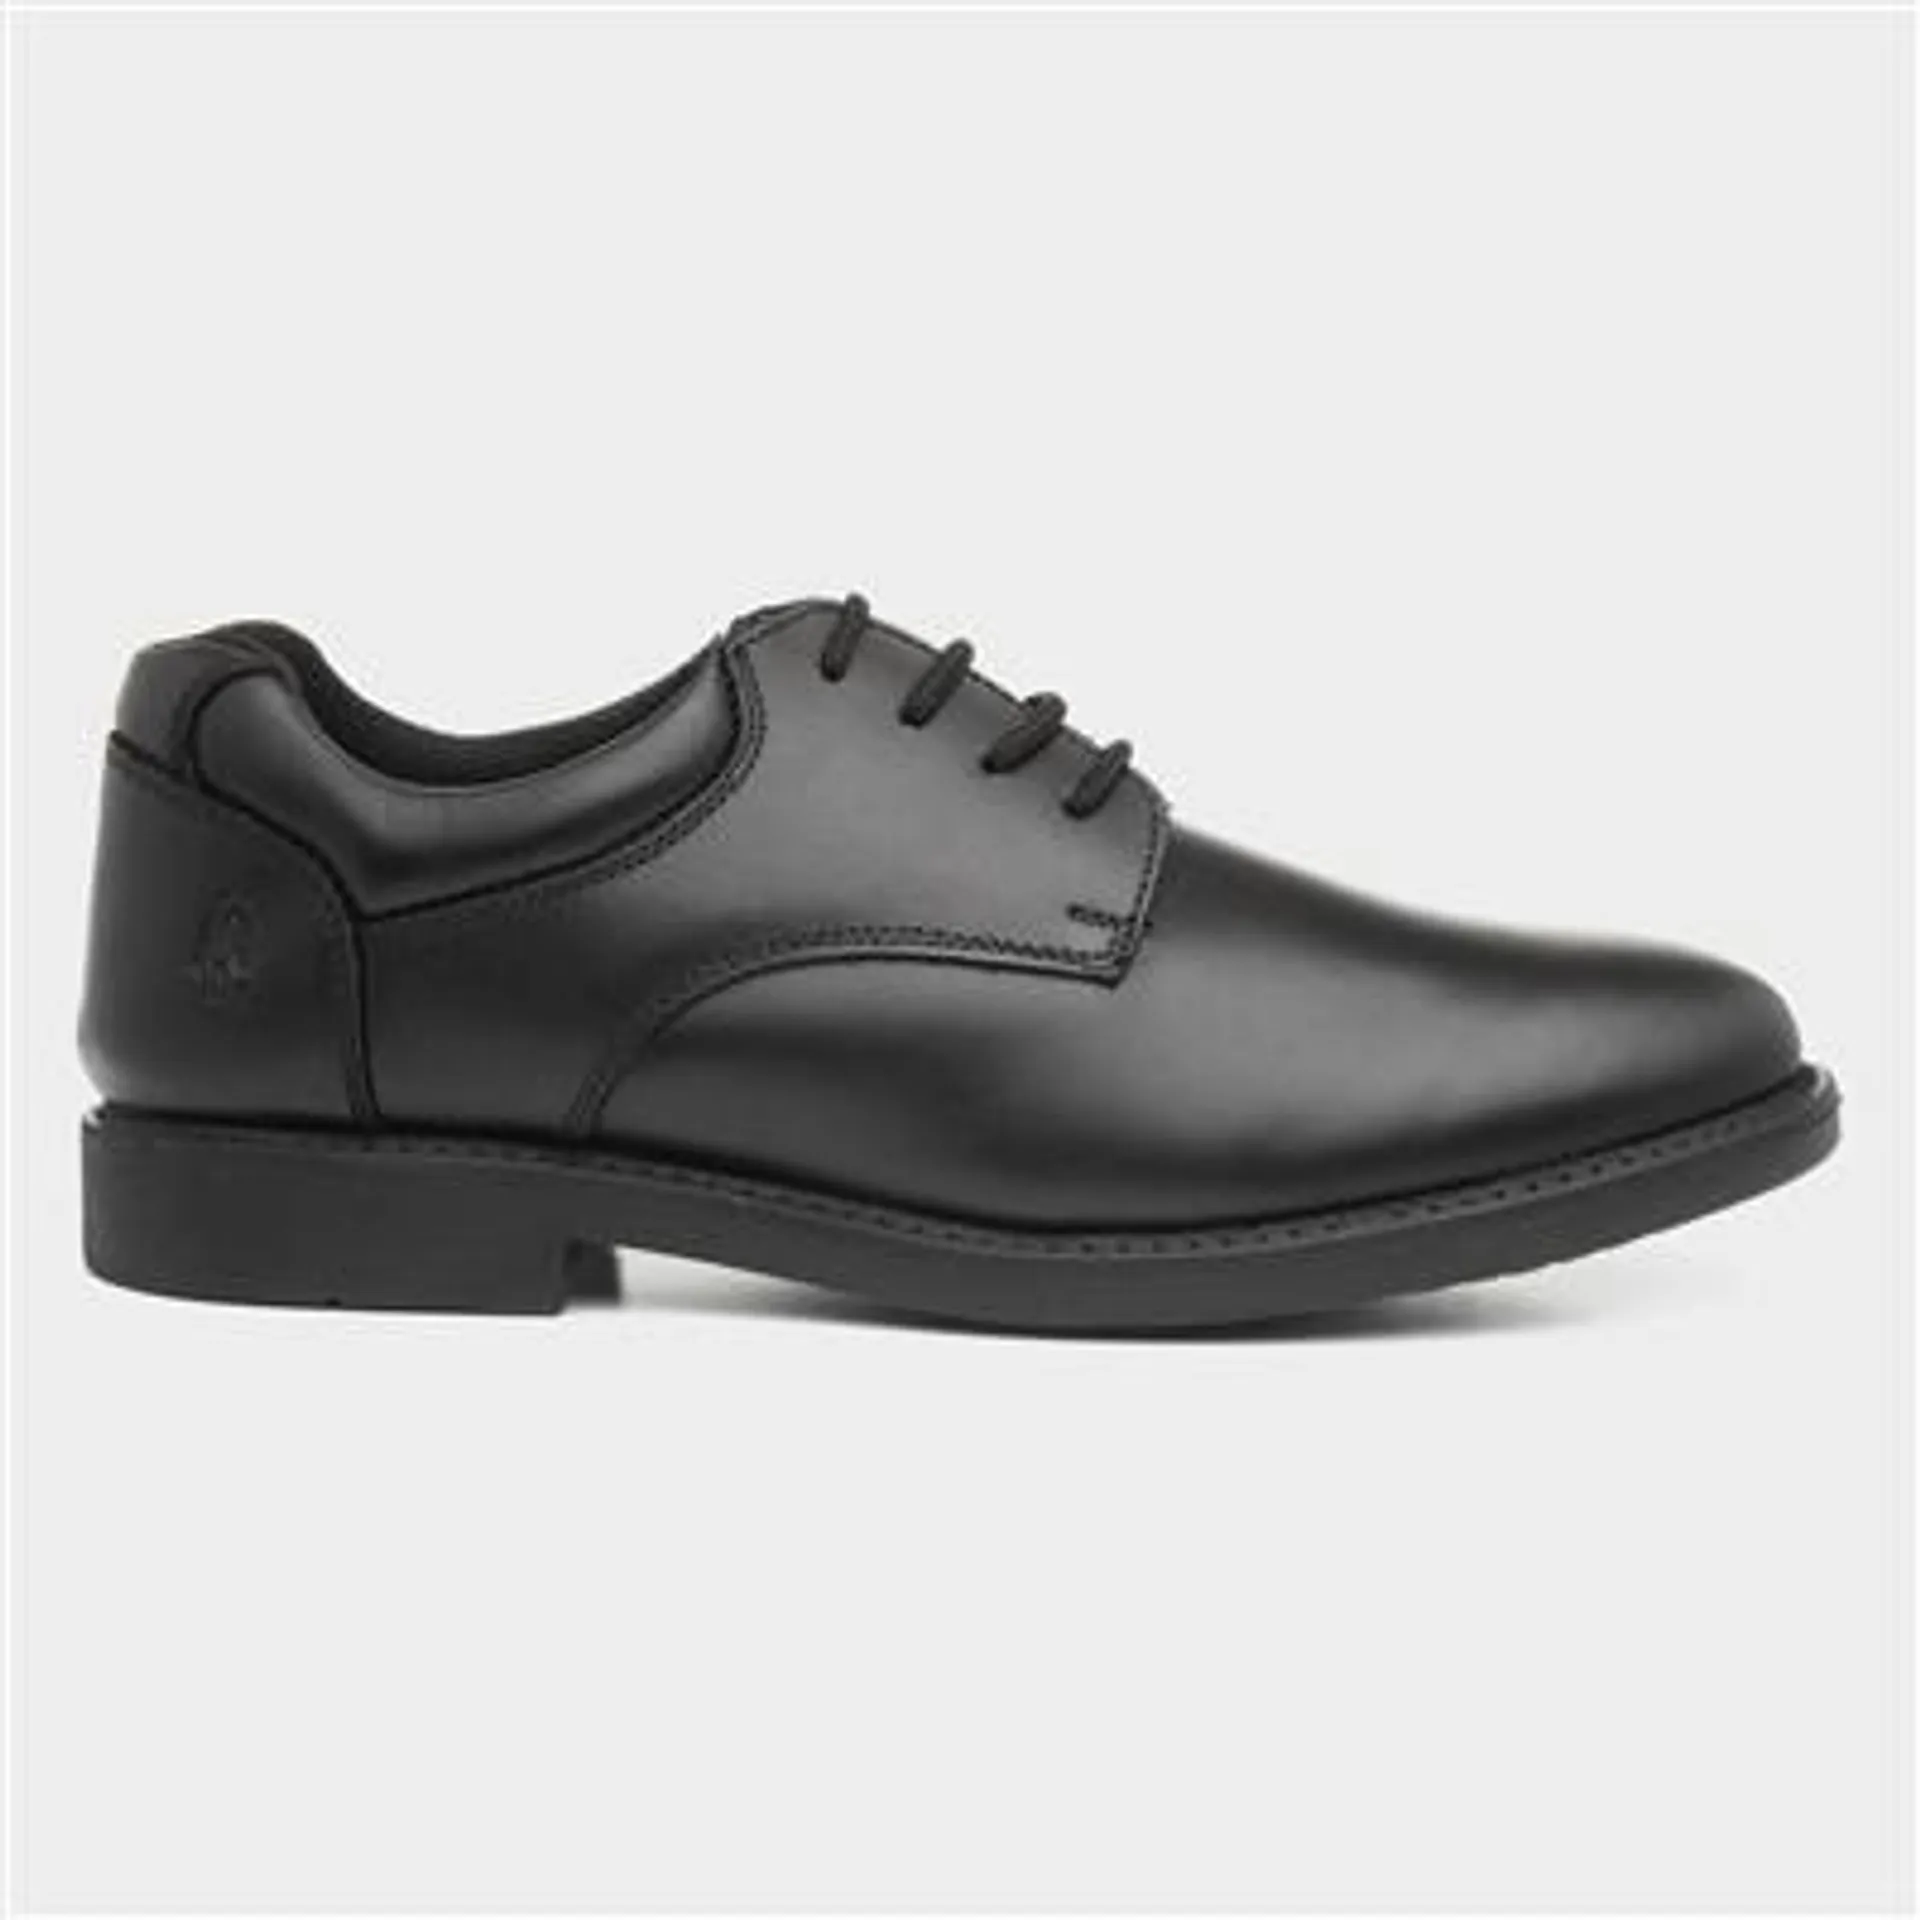 Hush Puppies Tim Boys Black Leather Lace Up Shoe